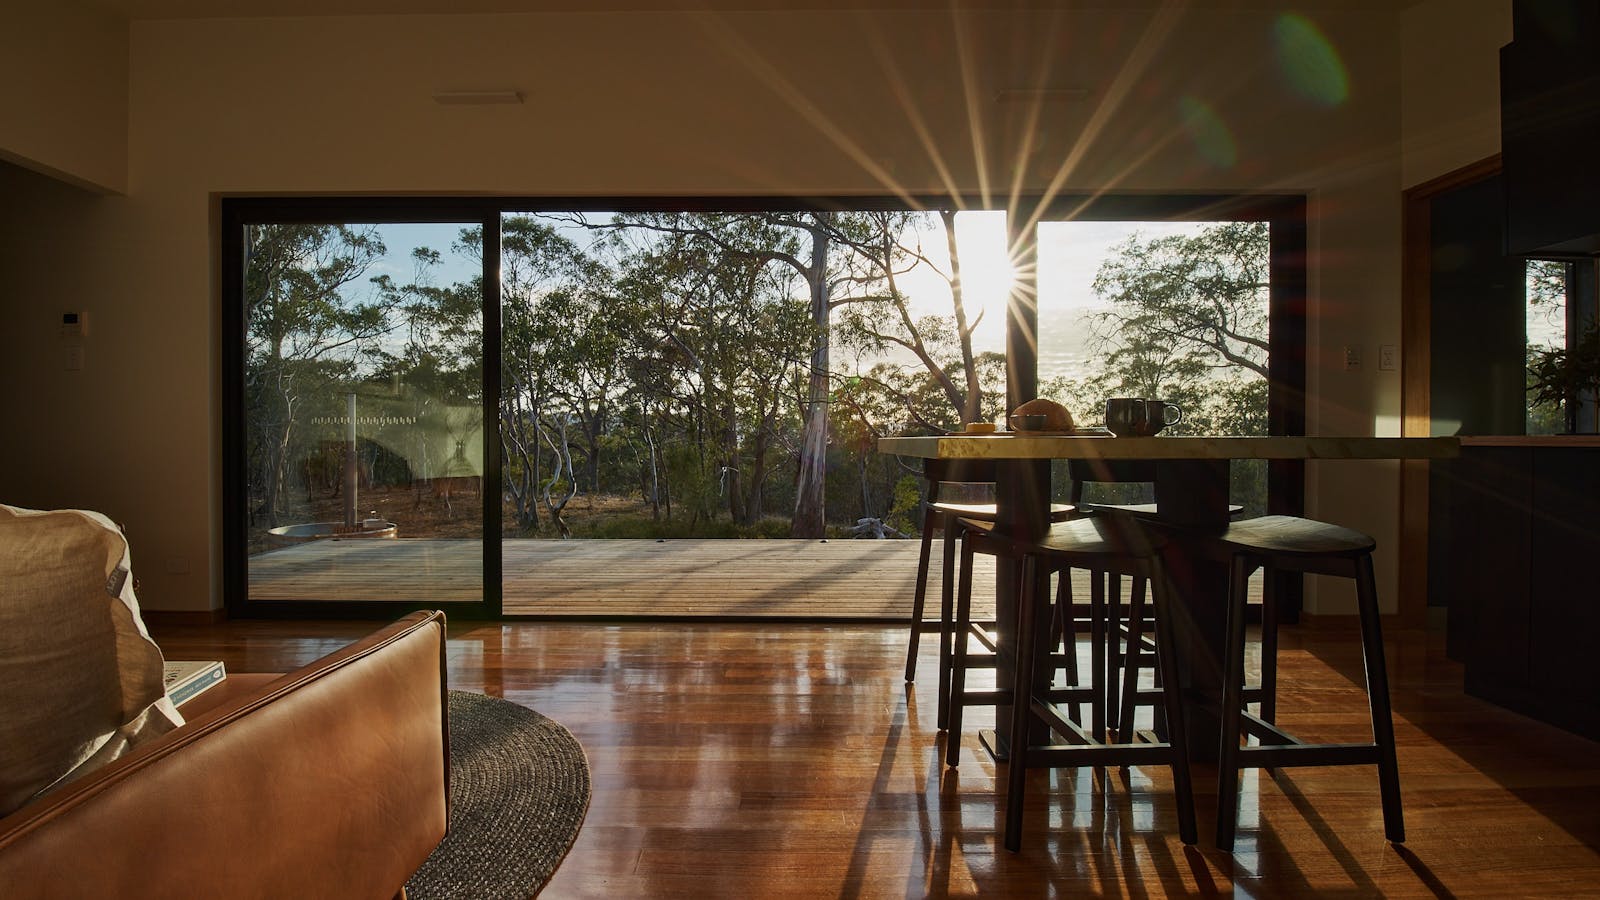 The Croft connects the internal and external spaces through large sliding doors